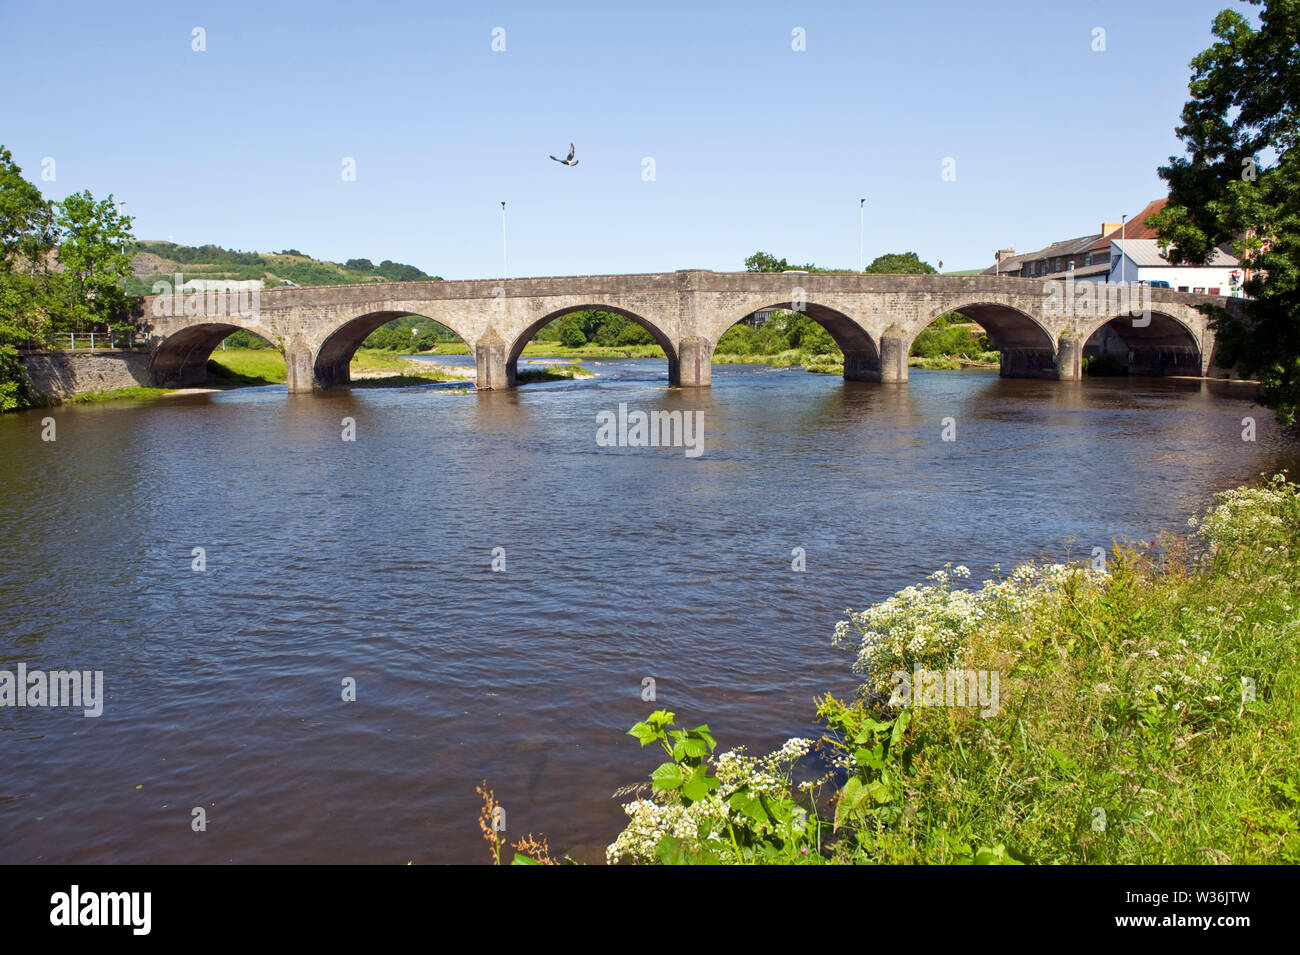 Bridge over the River Wye at Builth Wells Powys Wales UK Stock Photo